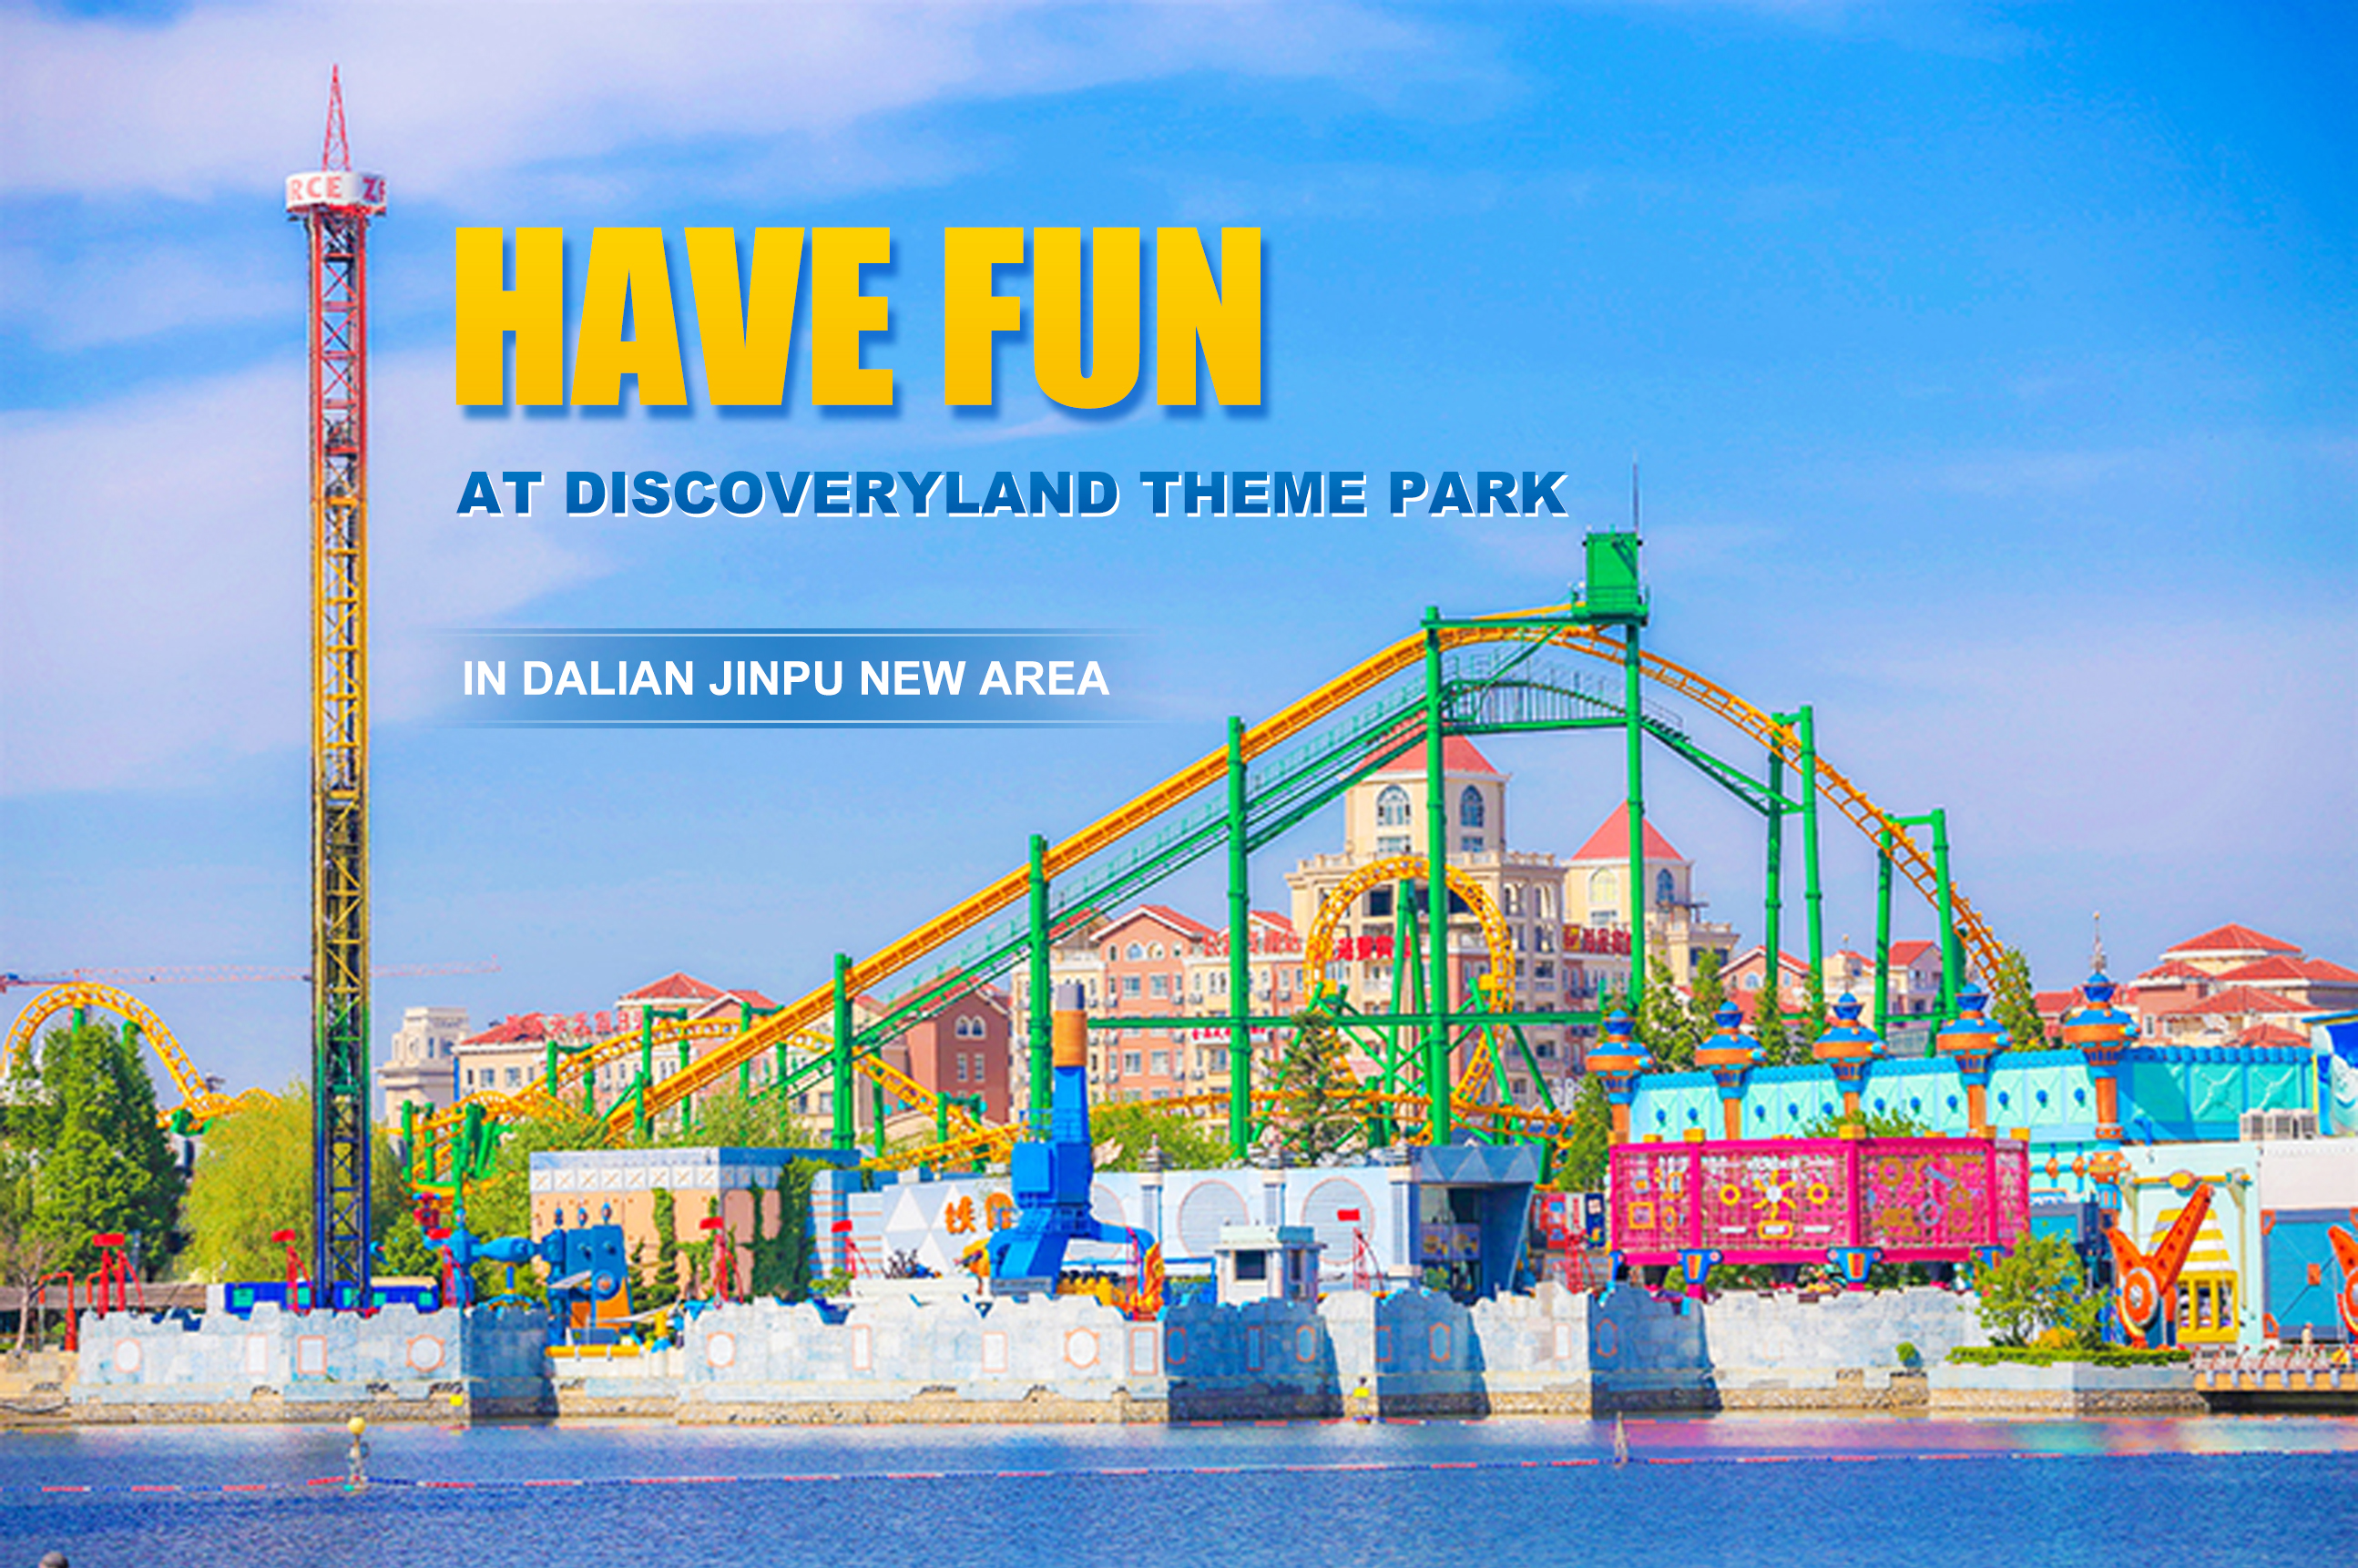 Discoveryland Theme Park waits for visitors in the upcoming Golden Week